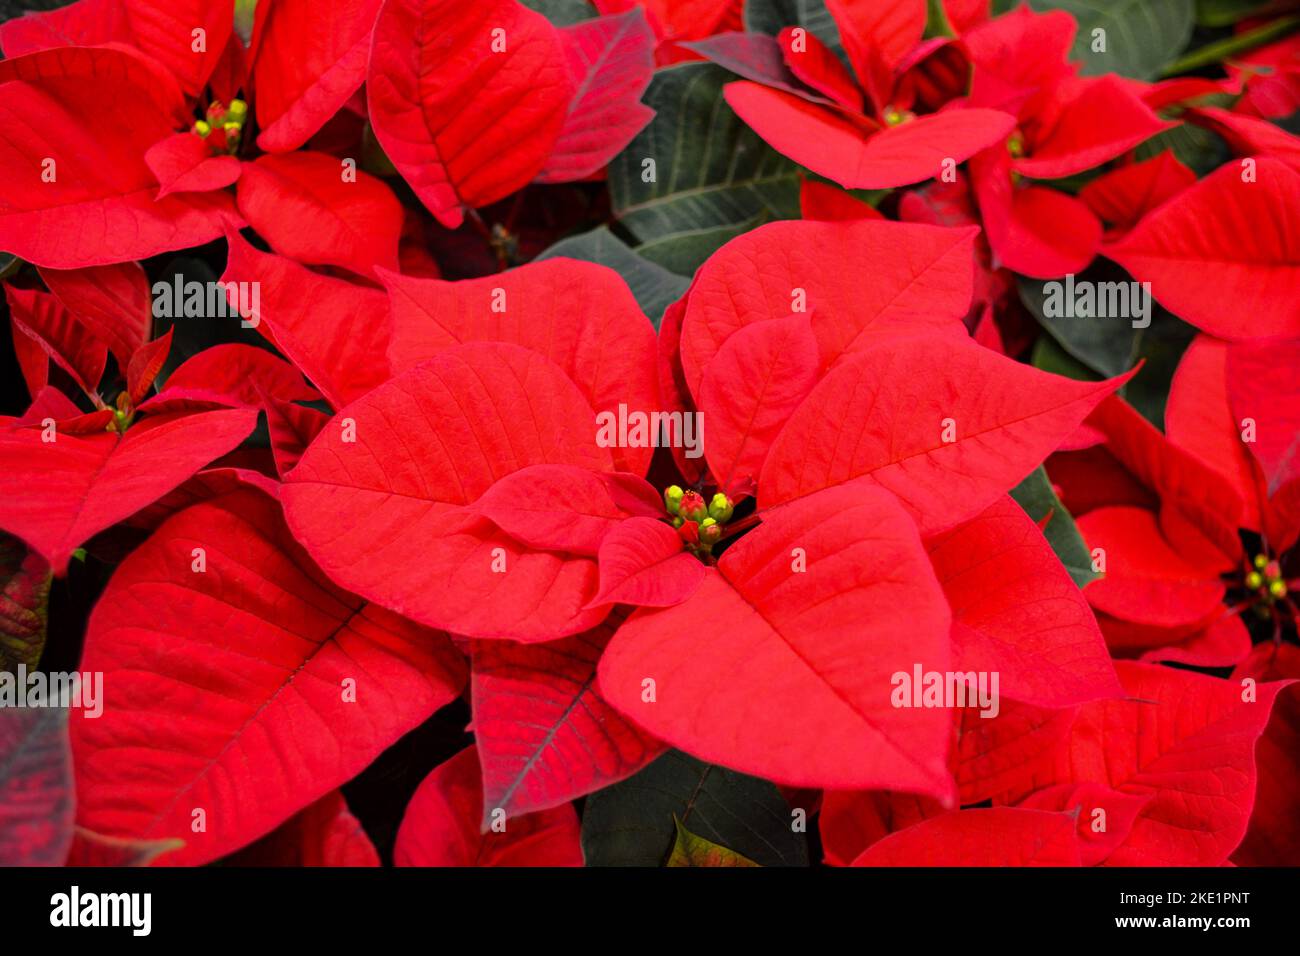 Close up of the bright red flower of poinsettia, otherwise called the Christmas star. Red festive background. Stock Photo